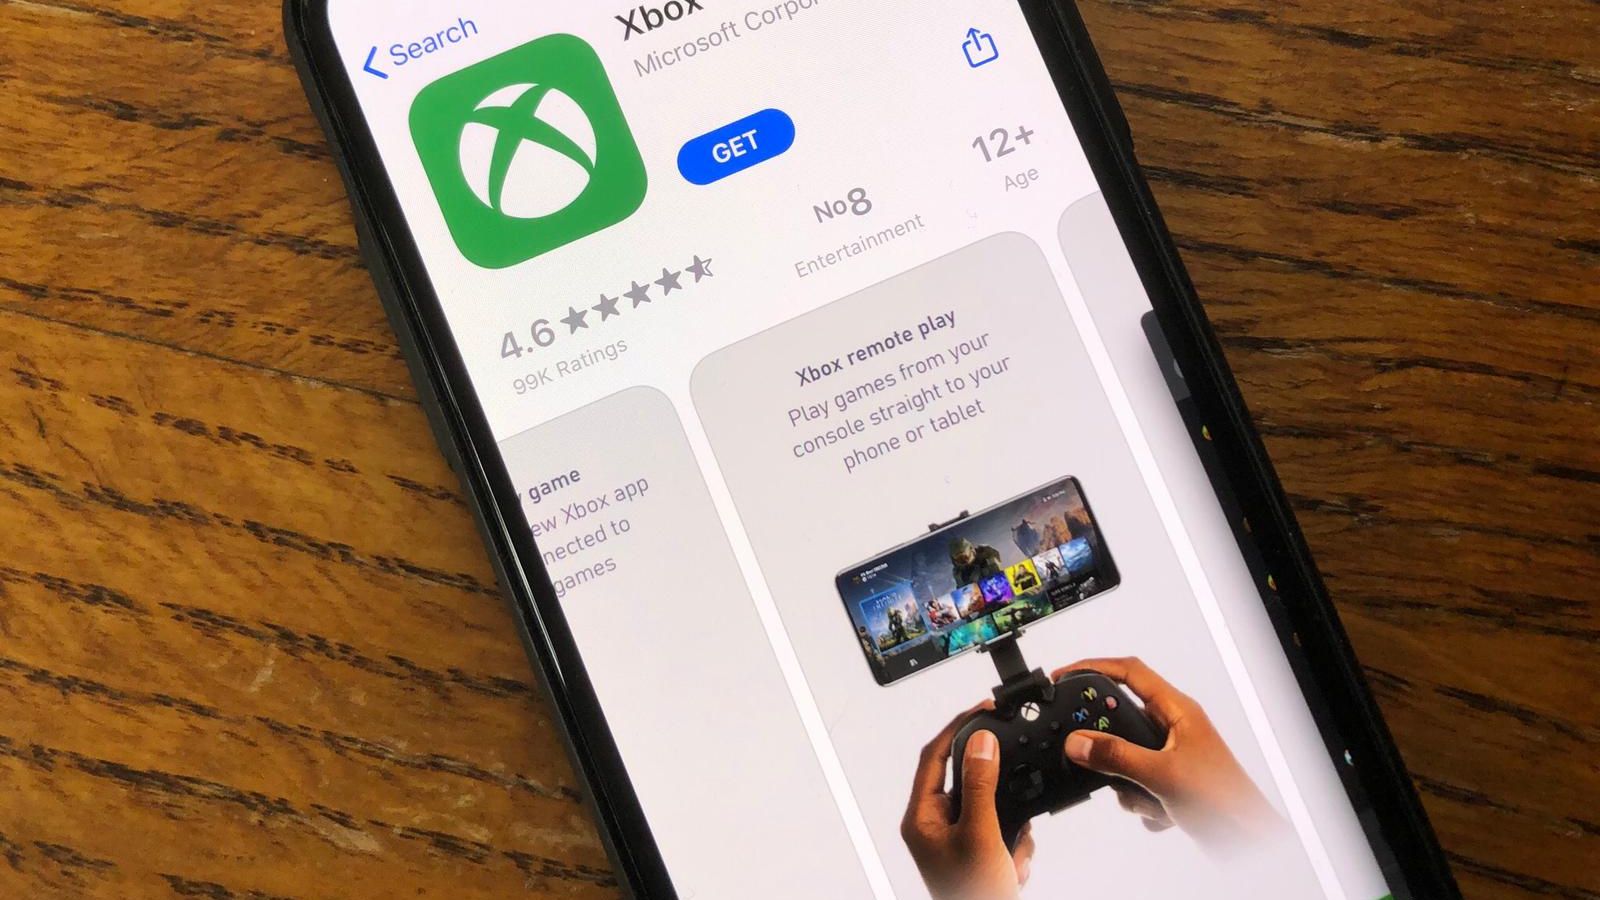 How to Play Xbox Games on Phone Without Console?